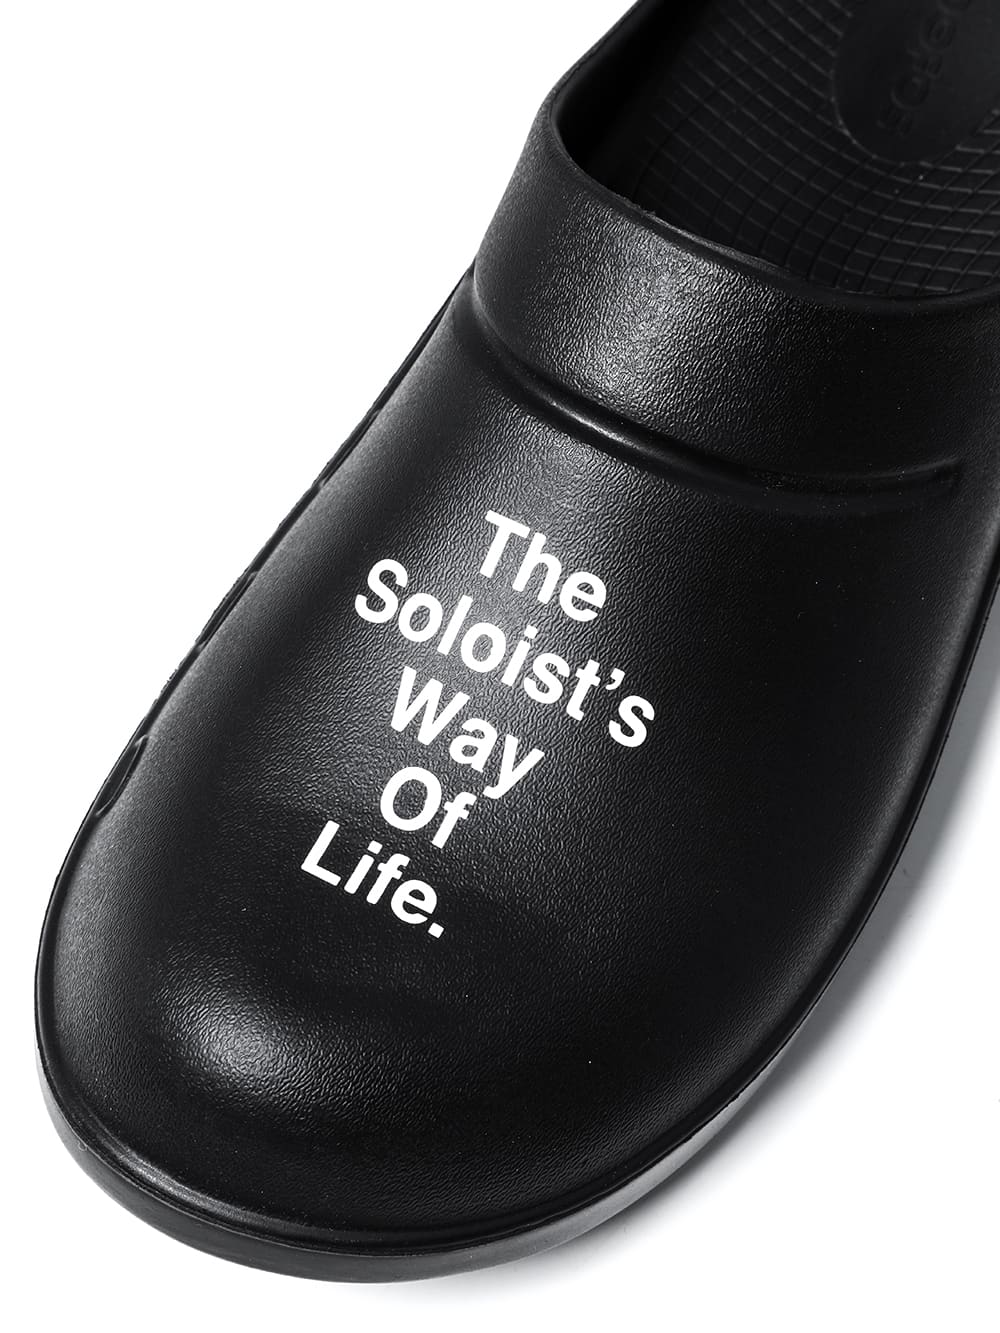 Crogs./The Soloist's Way Of Life./.- OOFOS x The Soloist 